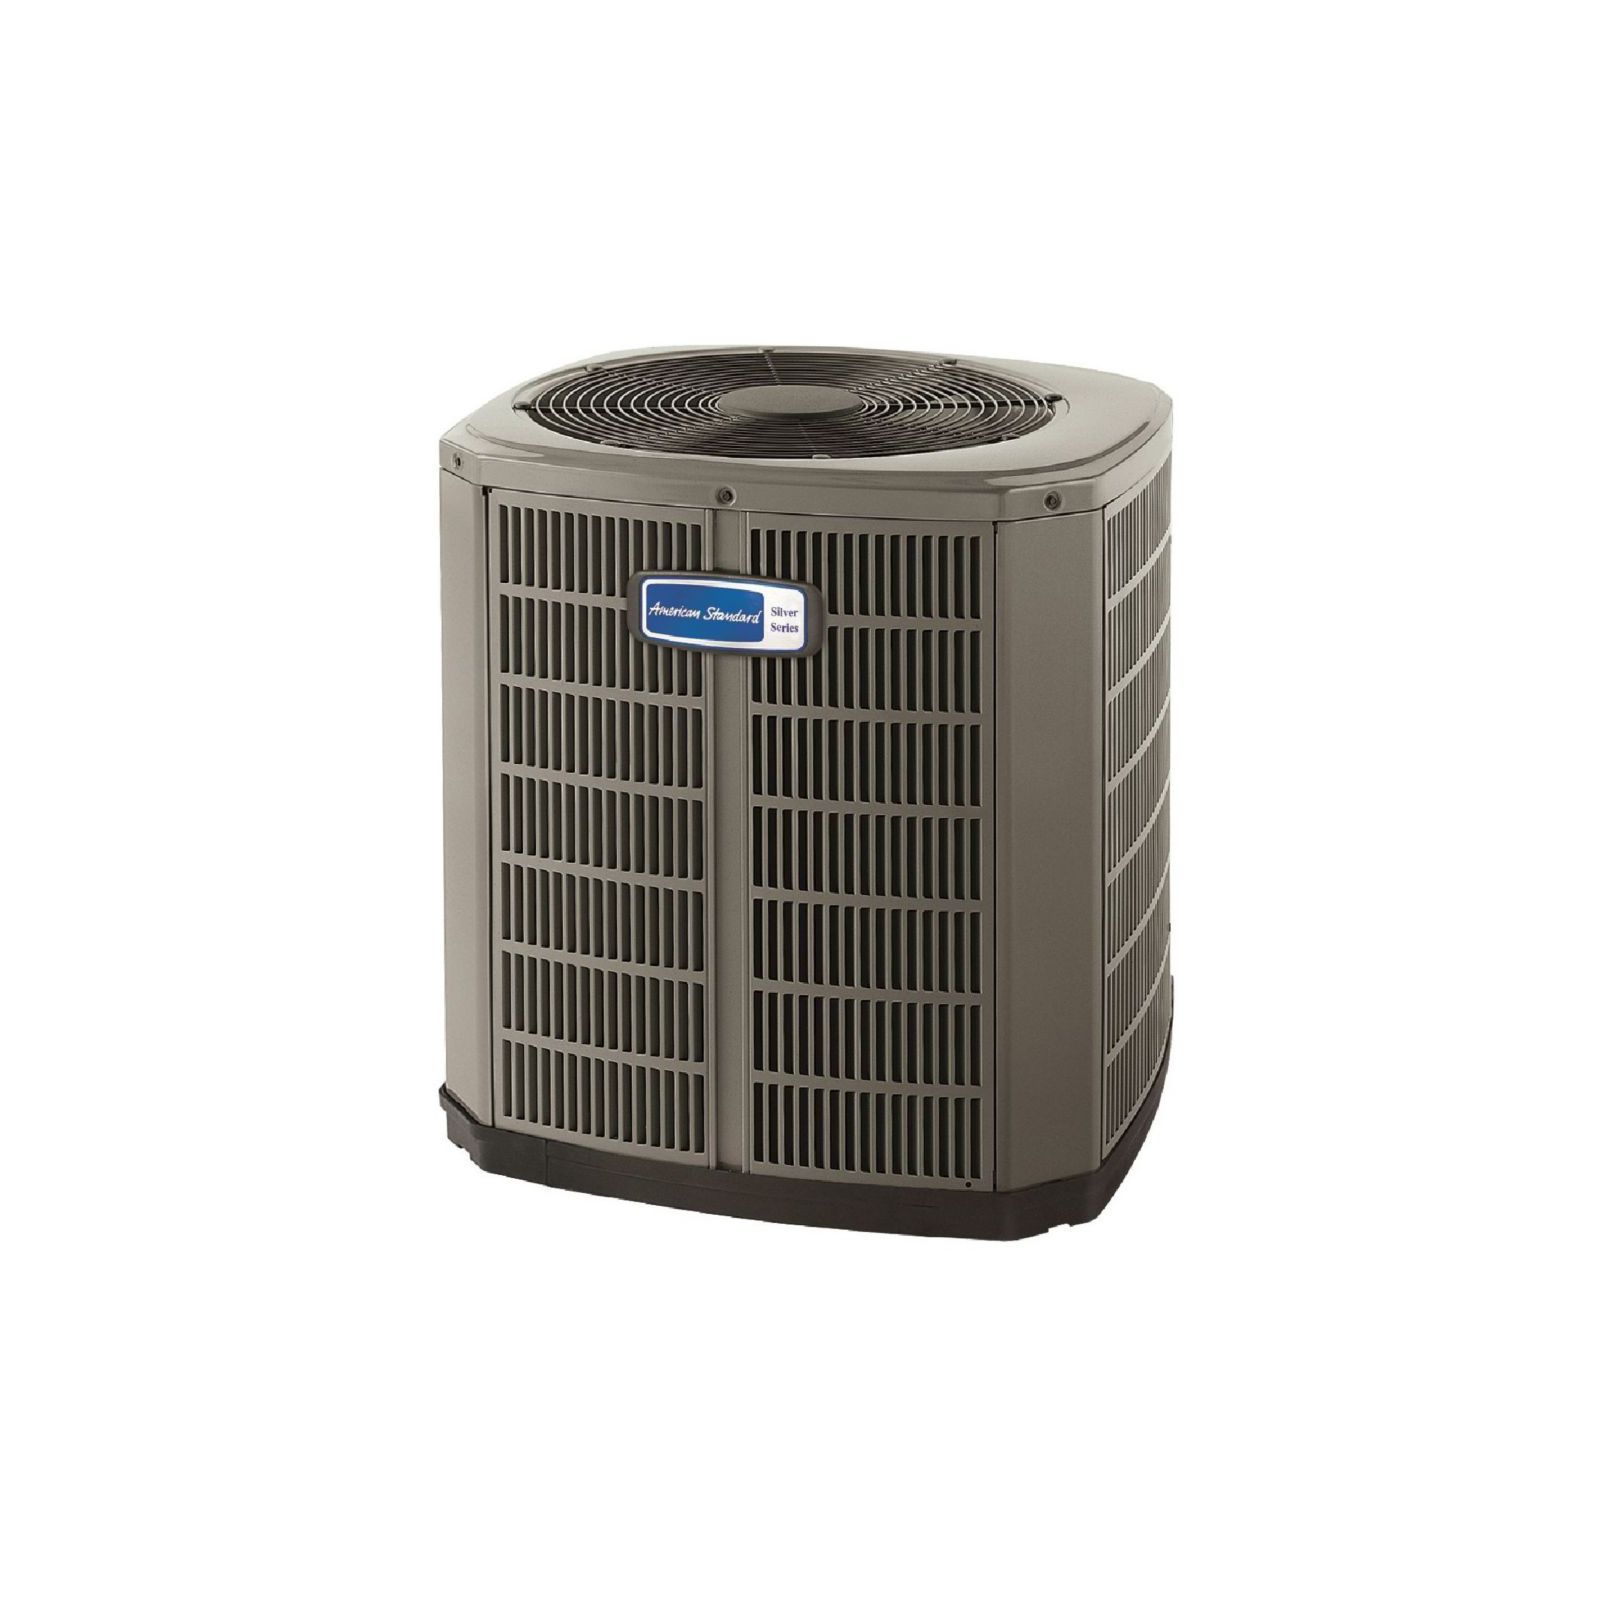 American Standard Heating & Cooling 2 Ton Air Conditioner 1874438